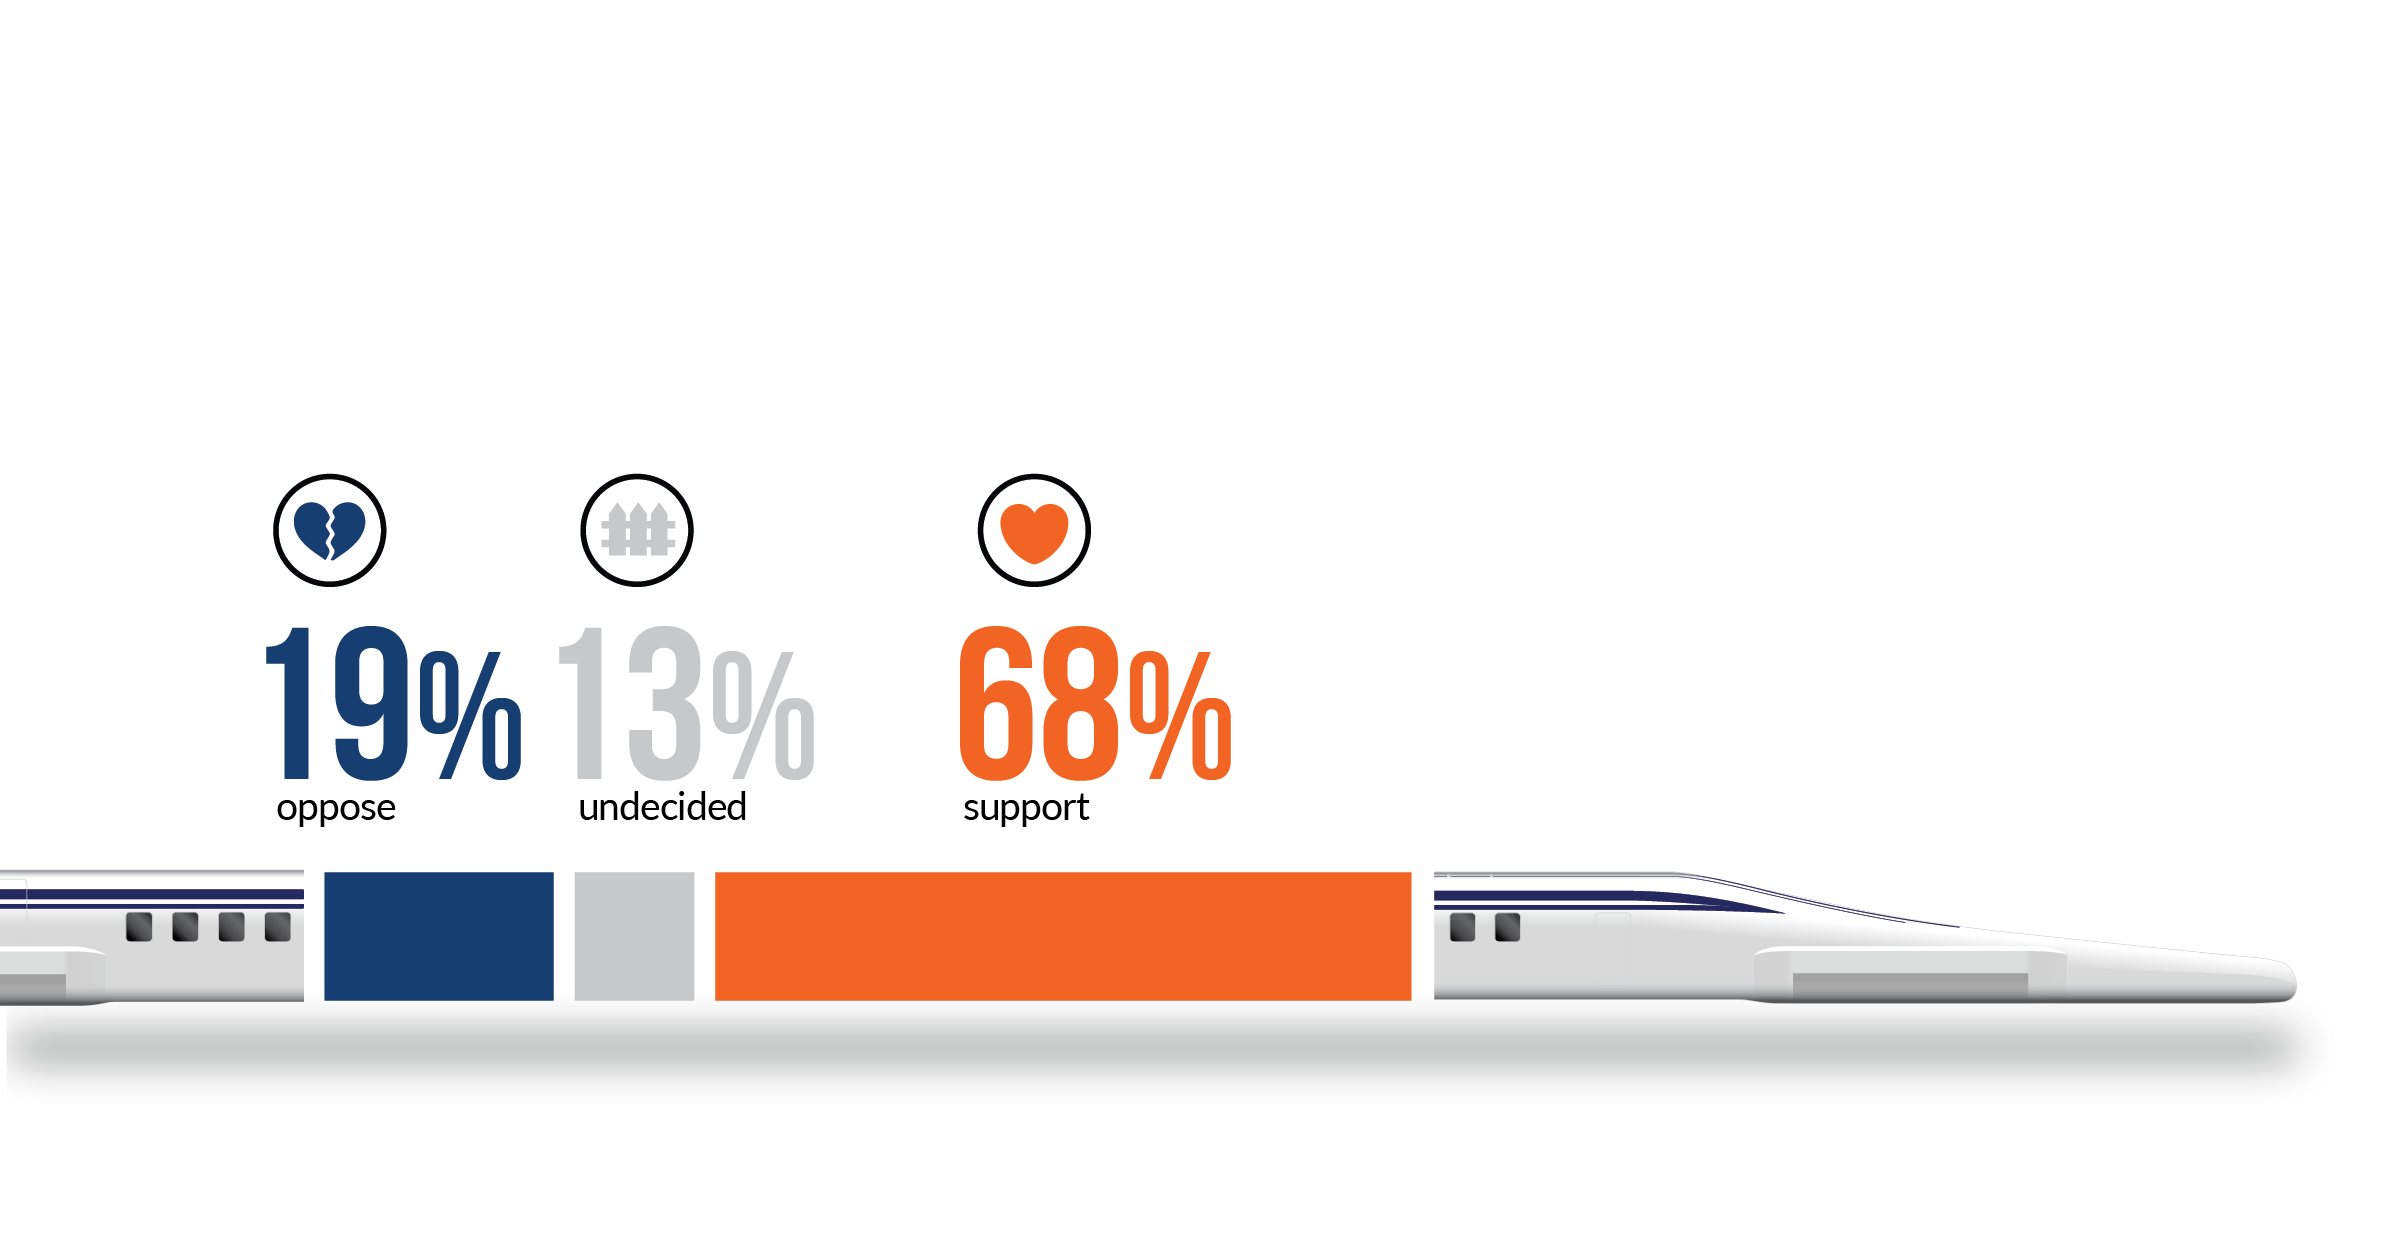 Infographic showing 68% support for Northeast Maglev project in Prince George's County